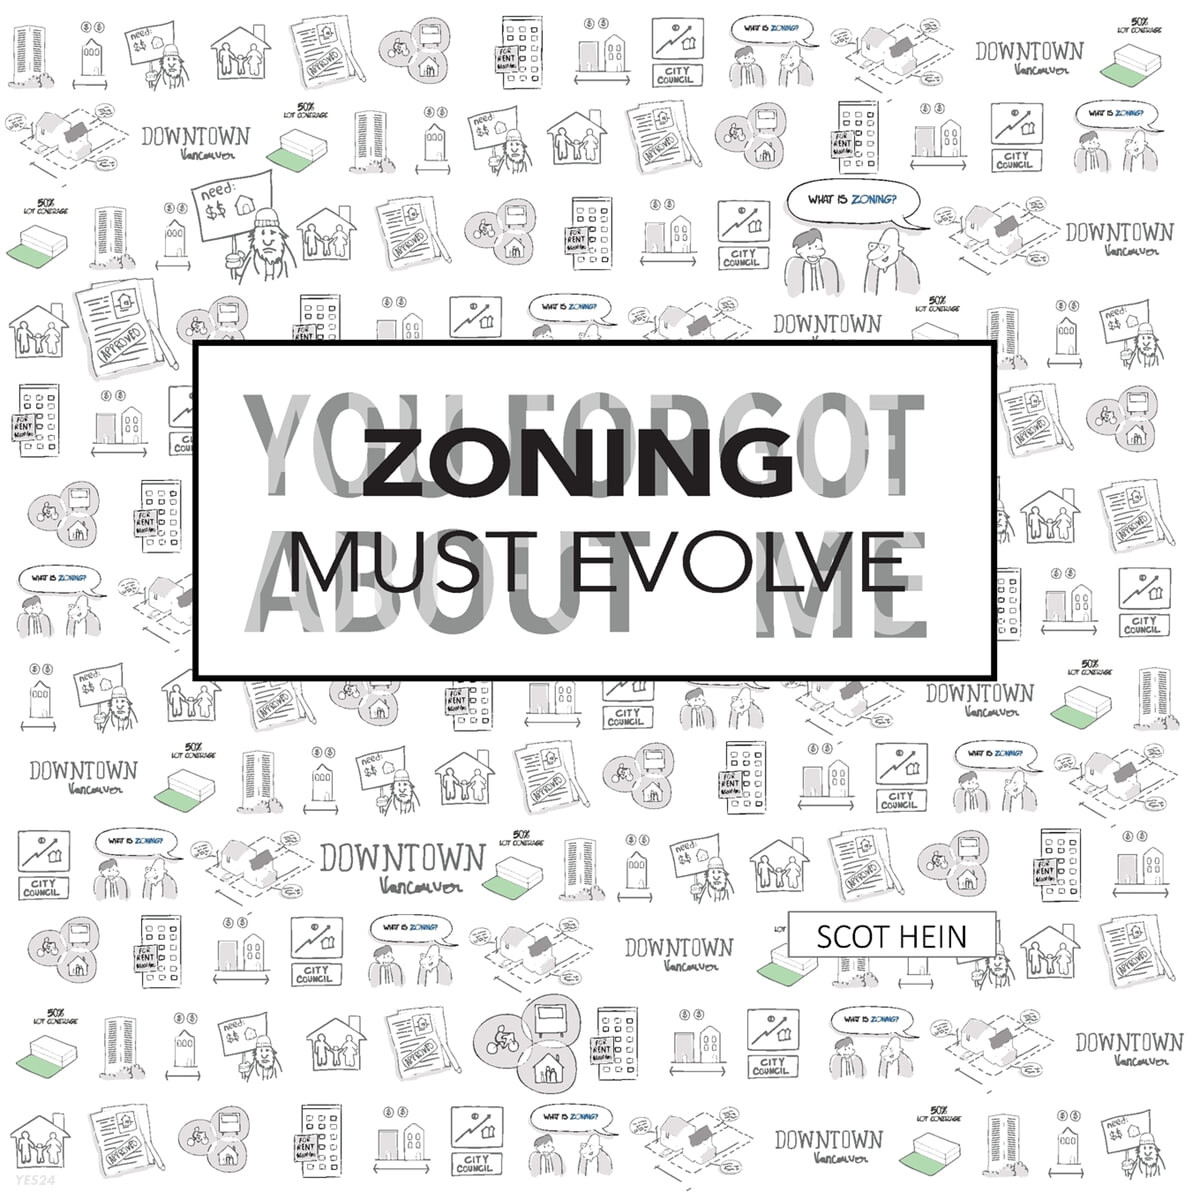 Zoning Must Evolve (You Forgot About Me)